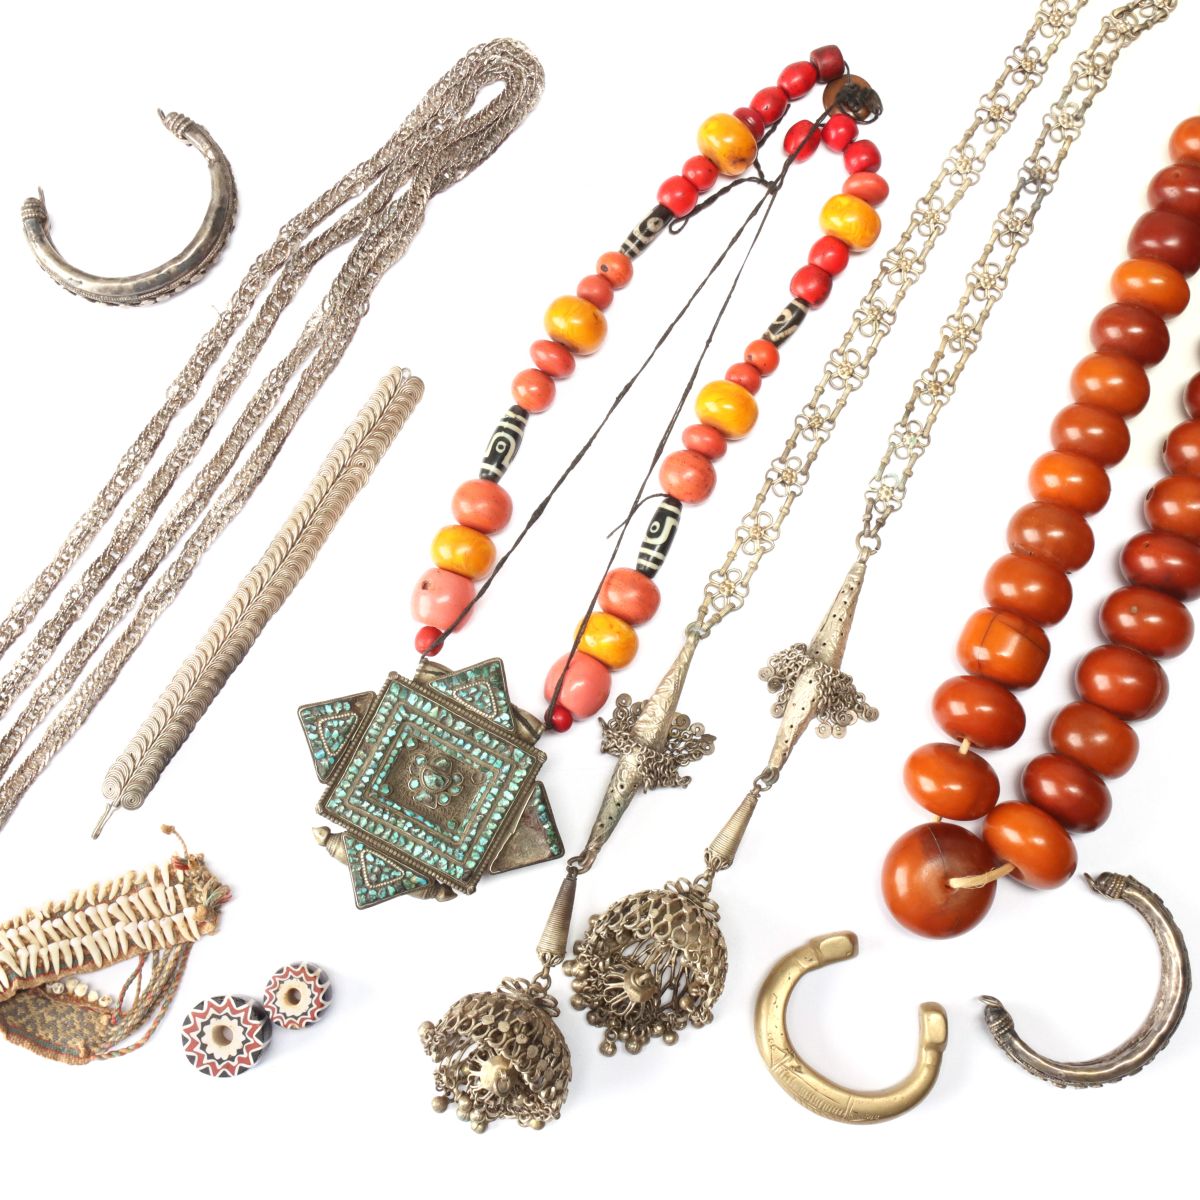 AN ESTATE LOT OF TRIBAL AND ETHNIC JEWELRY